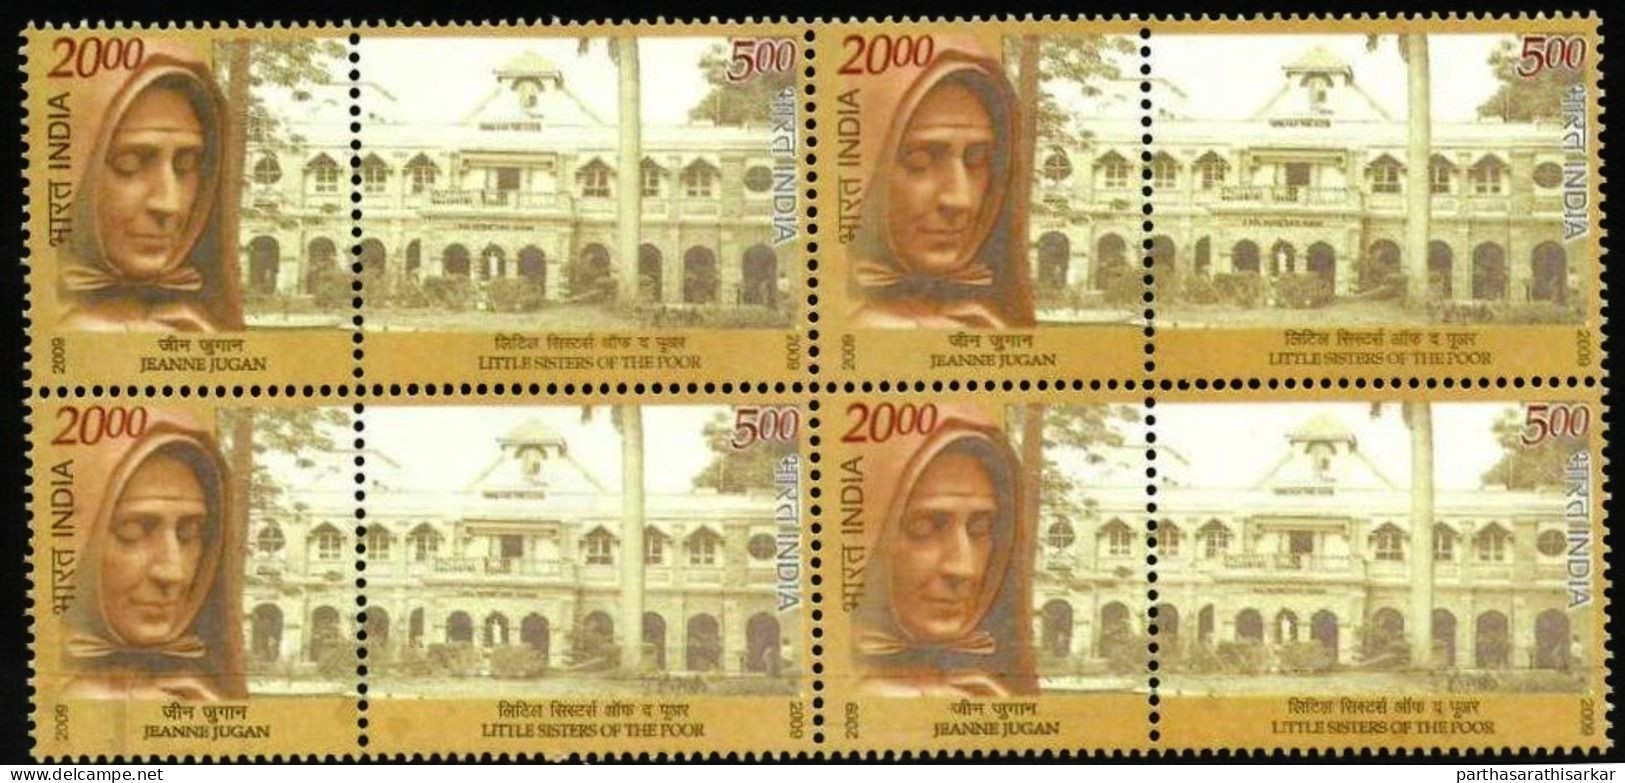 INDIA 2009 LITTLE SISTERS OF POOR COMPLETE SE-TANENT BLOCK OF 4 MNH RARE - Unused Stamps